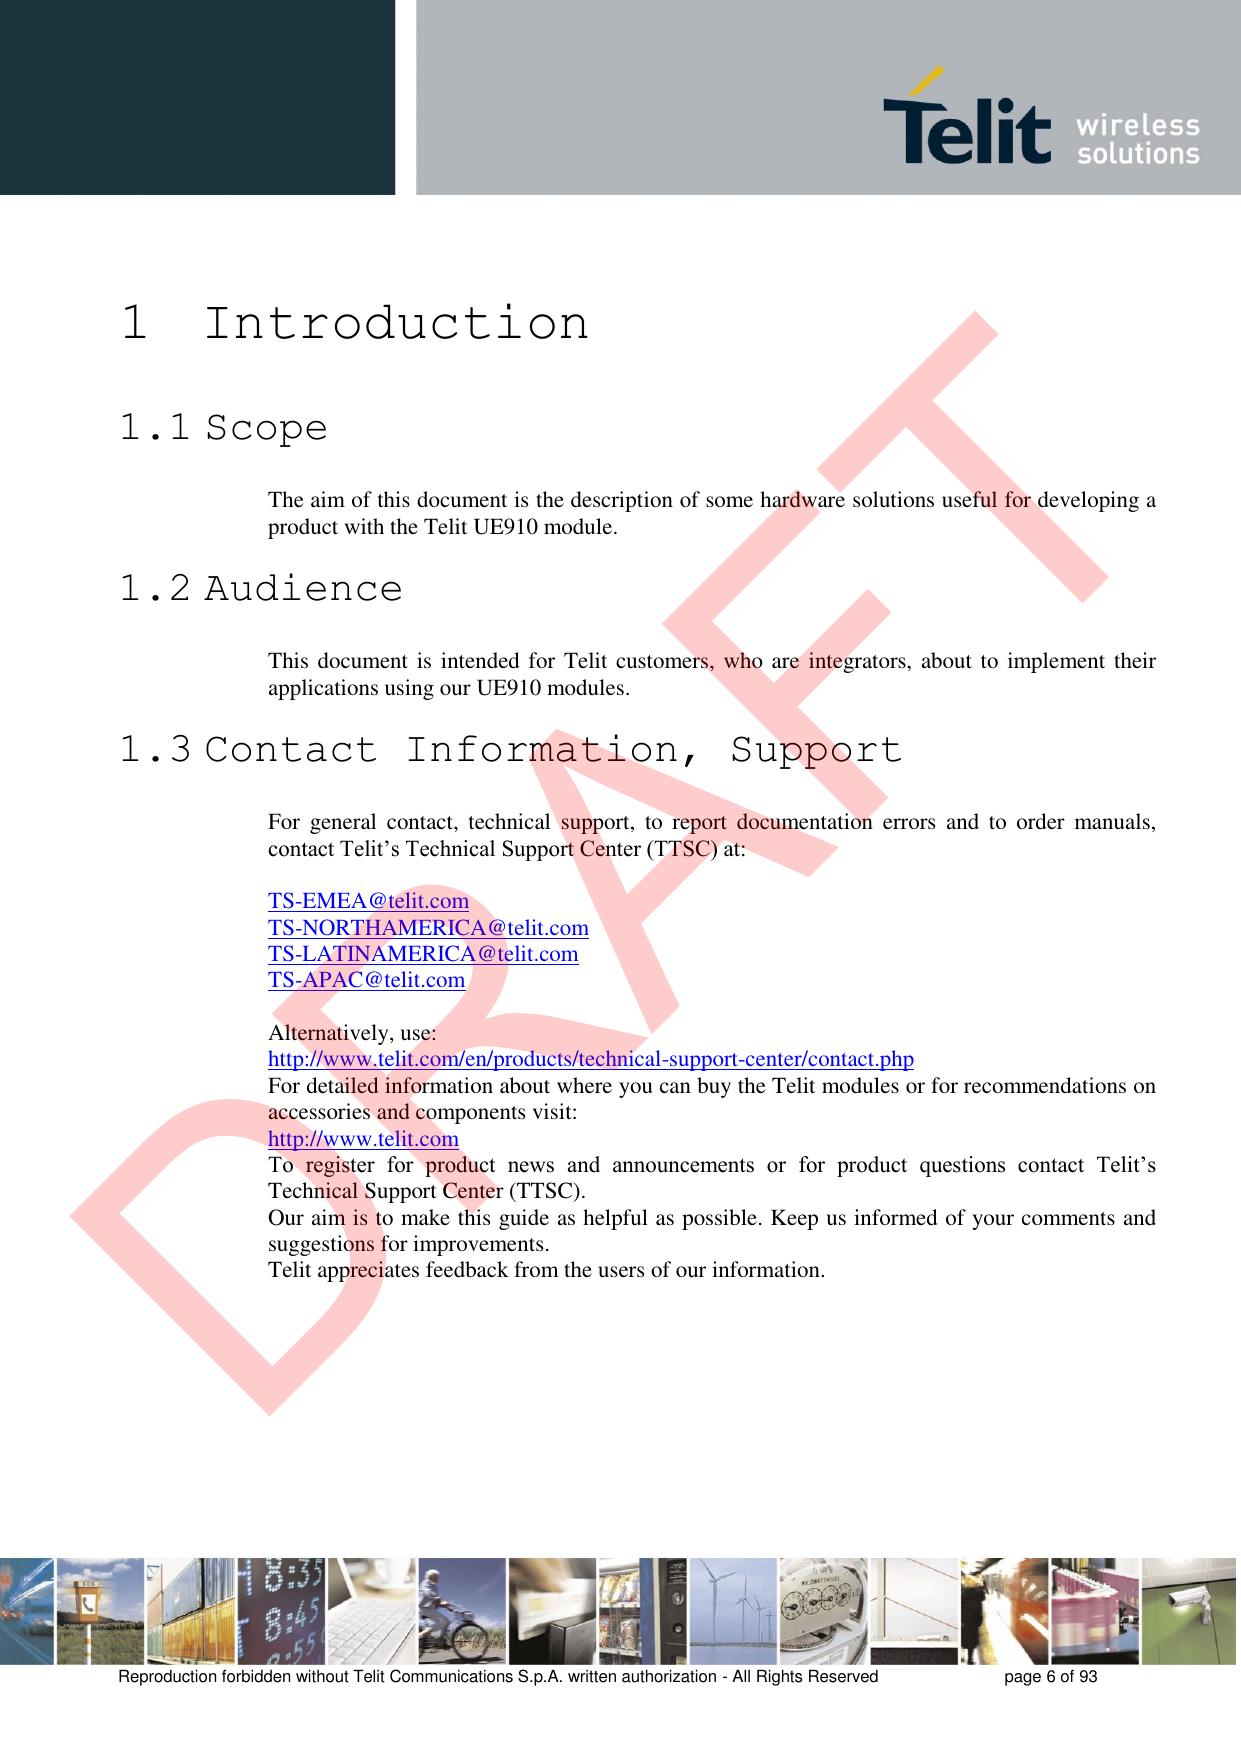 Reproduction forbidden without Telit Communications S.p.A. written authorization - All Rights Reserved  page 6 of 93 1 Introduction 1.1 Scope The aim of this document is the description of some hardware solutions useful for developing a product with the Telit UE910 module. 1.2 Audience This document is intended for Telit customers, who are integrators, about to implement their applications using our UE910 modules. 1.3 Contact Information, Support For  general  contact,  technical  support,  to  report  documentation  errors  and  to  order  manuals, contact Telit’s Technical Support Center (TTSC) at: TS-EMEA@telit.com TS-NORTHAMERICA@telit.com TS-LATINAMERICA@telit.com TS-APAC@telit.com Alternatively, use:  http://www.telit.com/en/products/technical-support-center/contact.php For detailed information about where you can buy the Telit modules or for recommendations on accessories and components visit:  http://www.telit.com To  register  for  product  news  and  announcements  or  for  product  questions  contact  Telit’s Technical Support Center (TTSC). Our aim is to make this guide as helpful as possible. Keep us informed of your comments and suggestions for improvements. Telit appreciates feedback from the users of our information. DRAFT